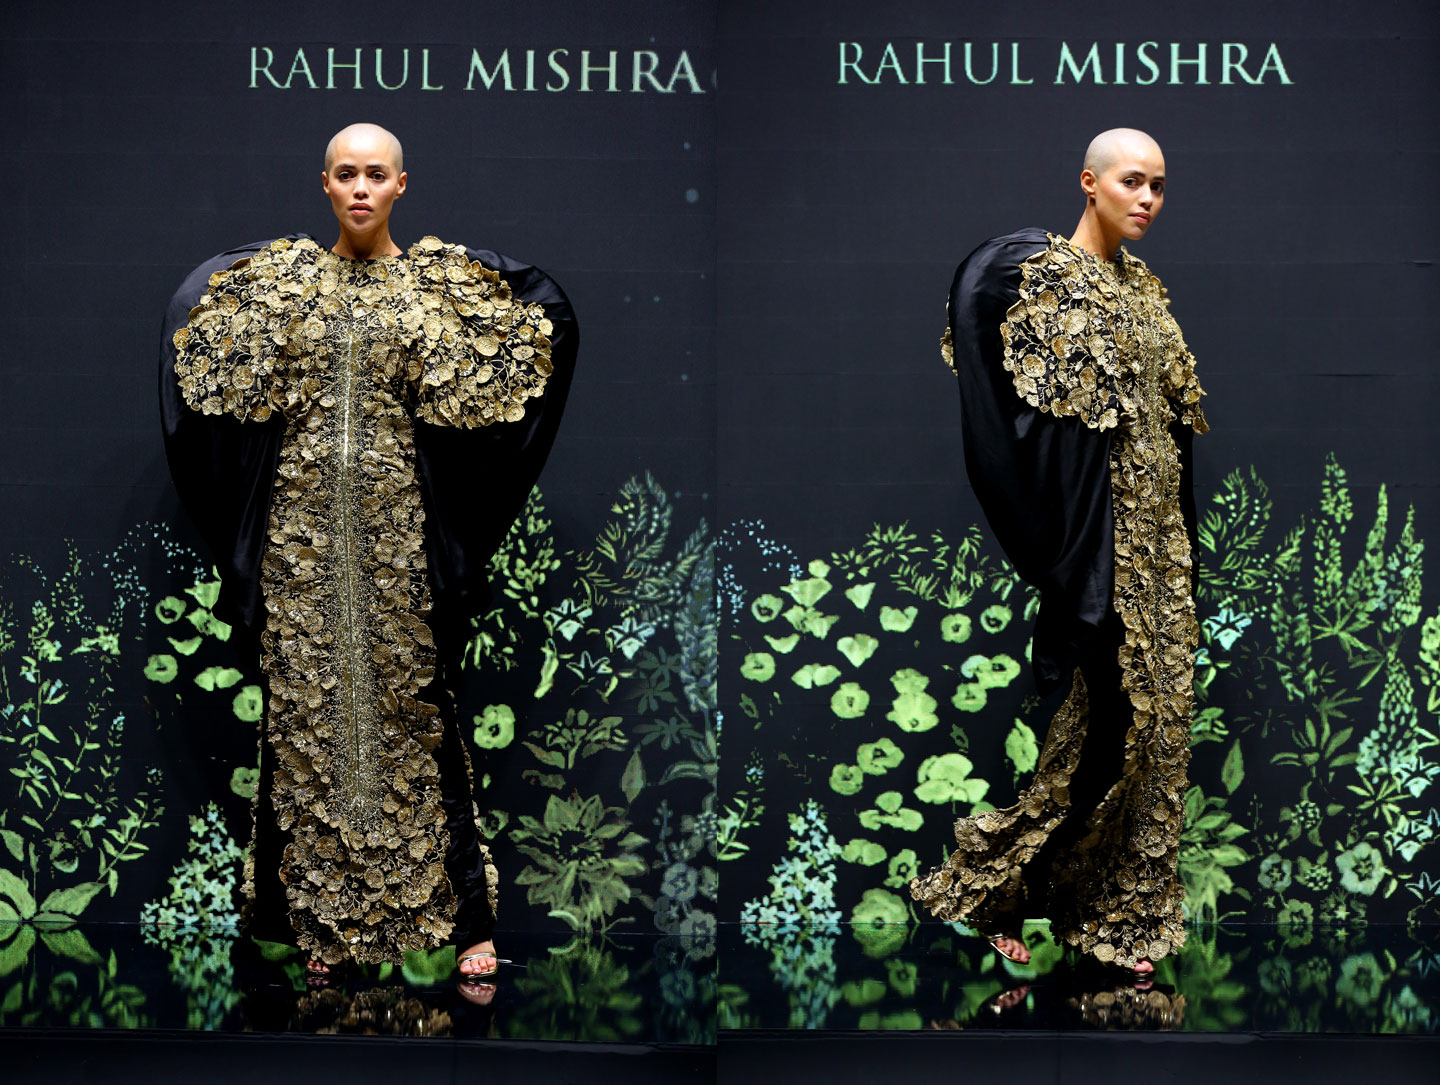 The Grand Finale of the Istituto Marangoni's Talents Show in Dubai by Rahul Mishra